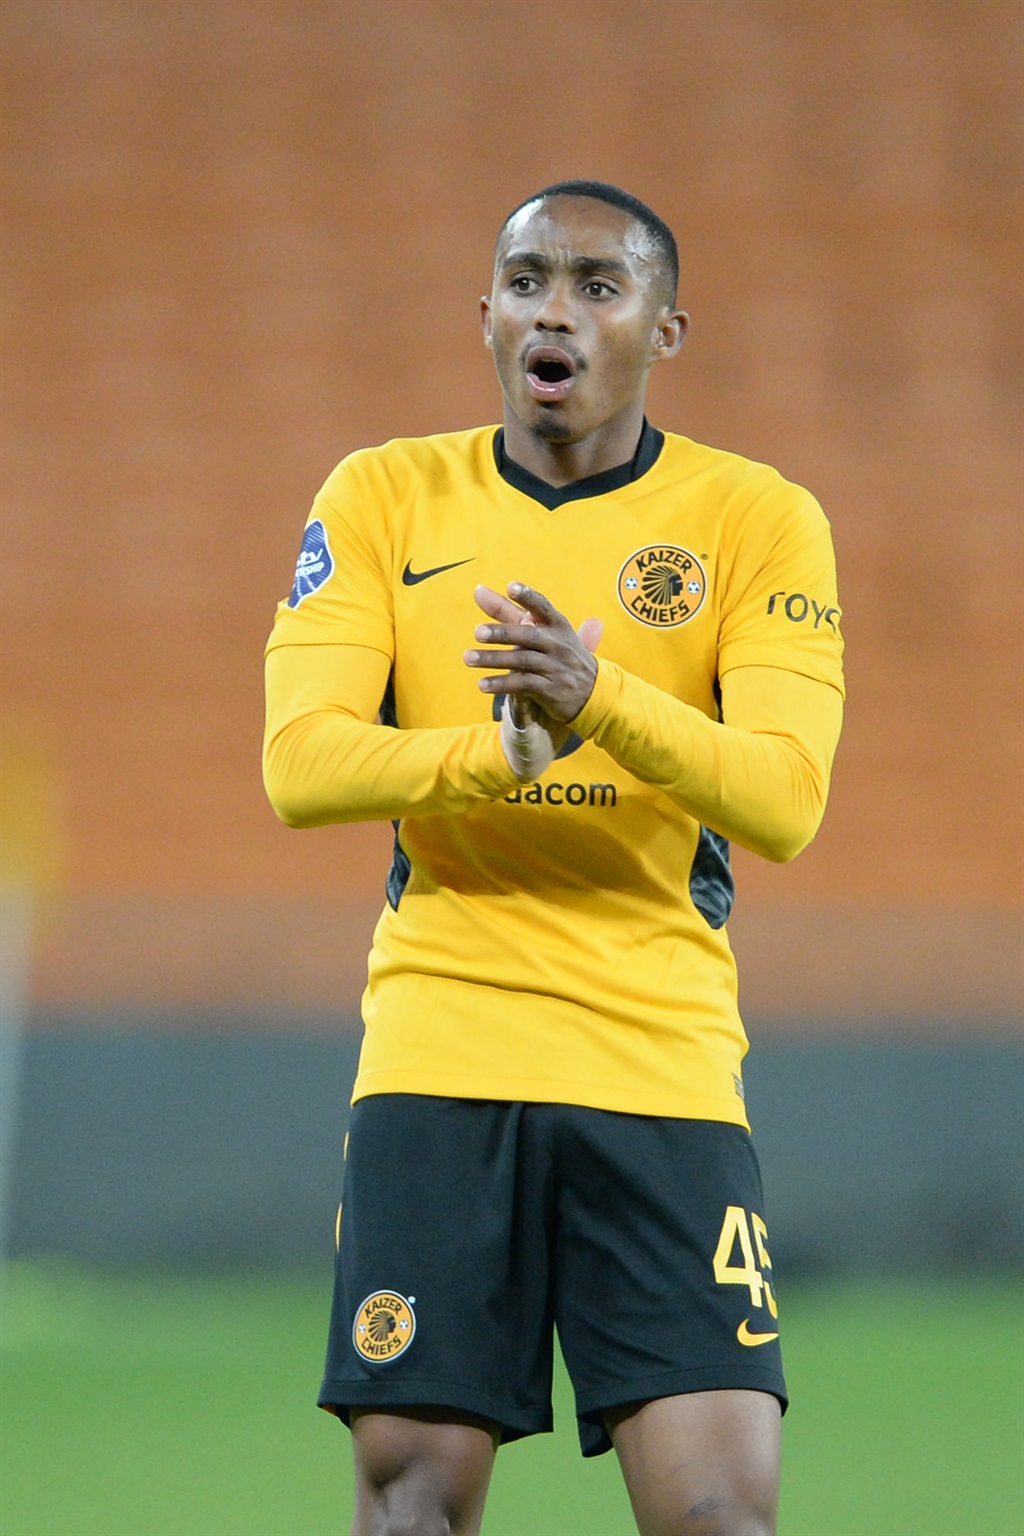 JOHANNESBURG, SOUTH AFRICA - MAY 03:    Njabulo Blom of Kaizer Chiefs  during the DStv Premiership match between Kaizer Chiefs and Marumo Gallants FC at FNB Stadium on May 03, 2022 in Johannesburg, South Africa. (Photo by Lefty Shivambu/Gallo Images)